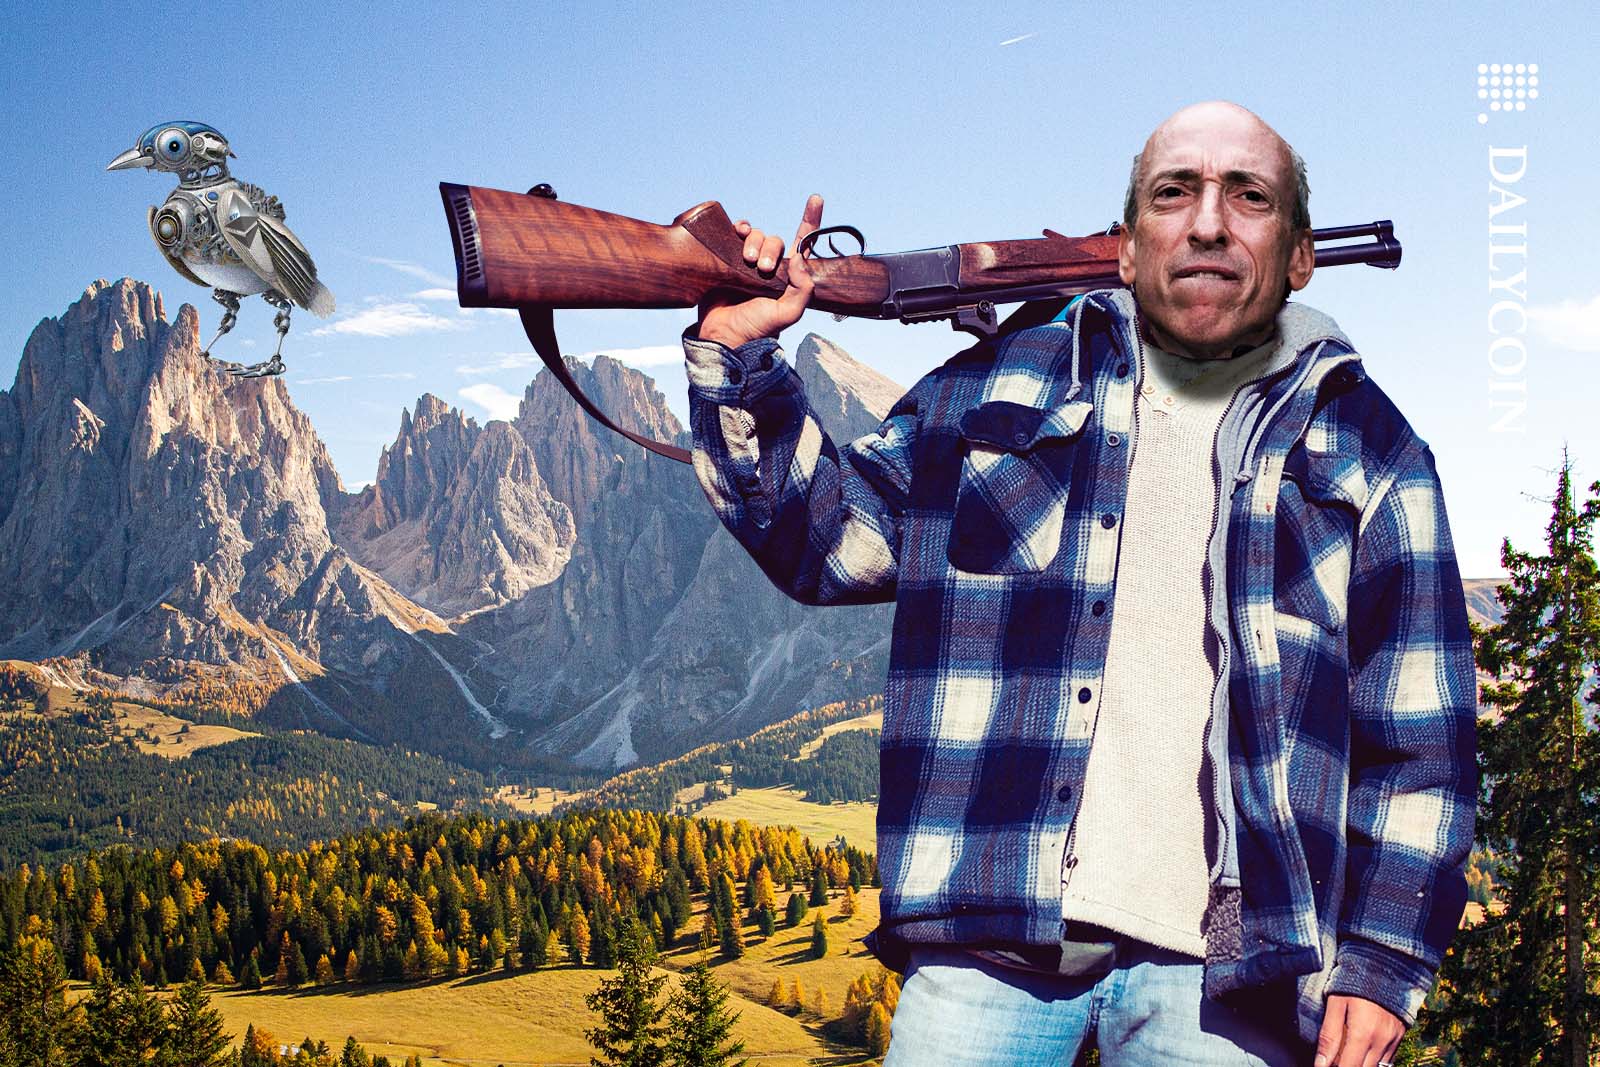 Gary Gensler getting ready to shoot a bird with a shotgun on his shoulder.